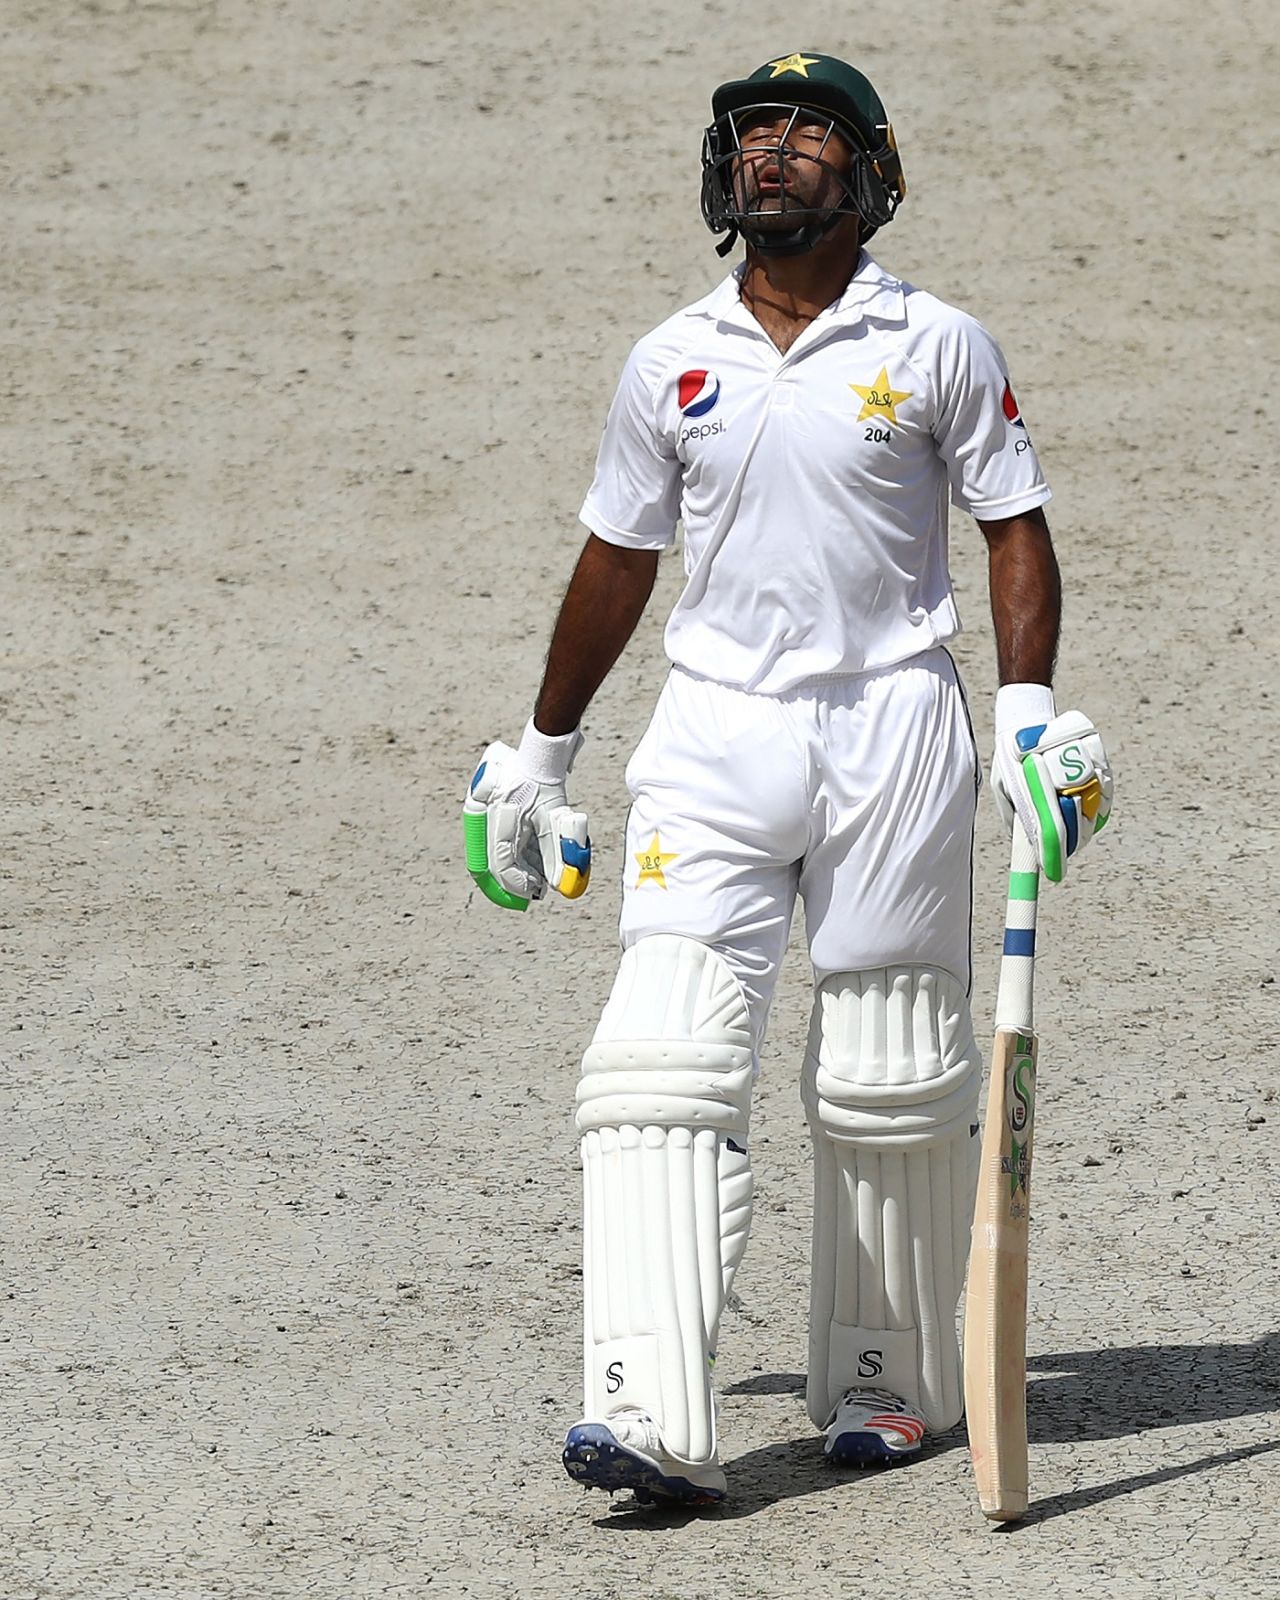 Asad Shafiq is relieved after getting to a fifty, Pakistan v Australia, 1st Test, Dubai, 2nd day, October 8, 2018